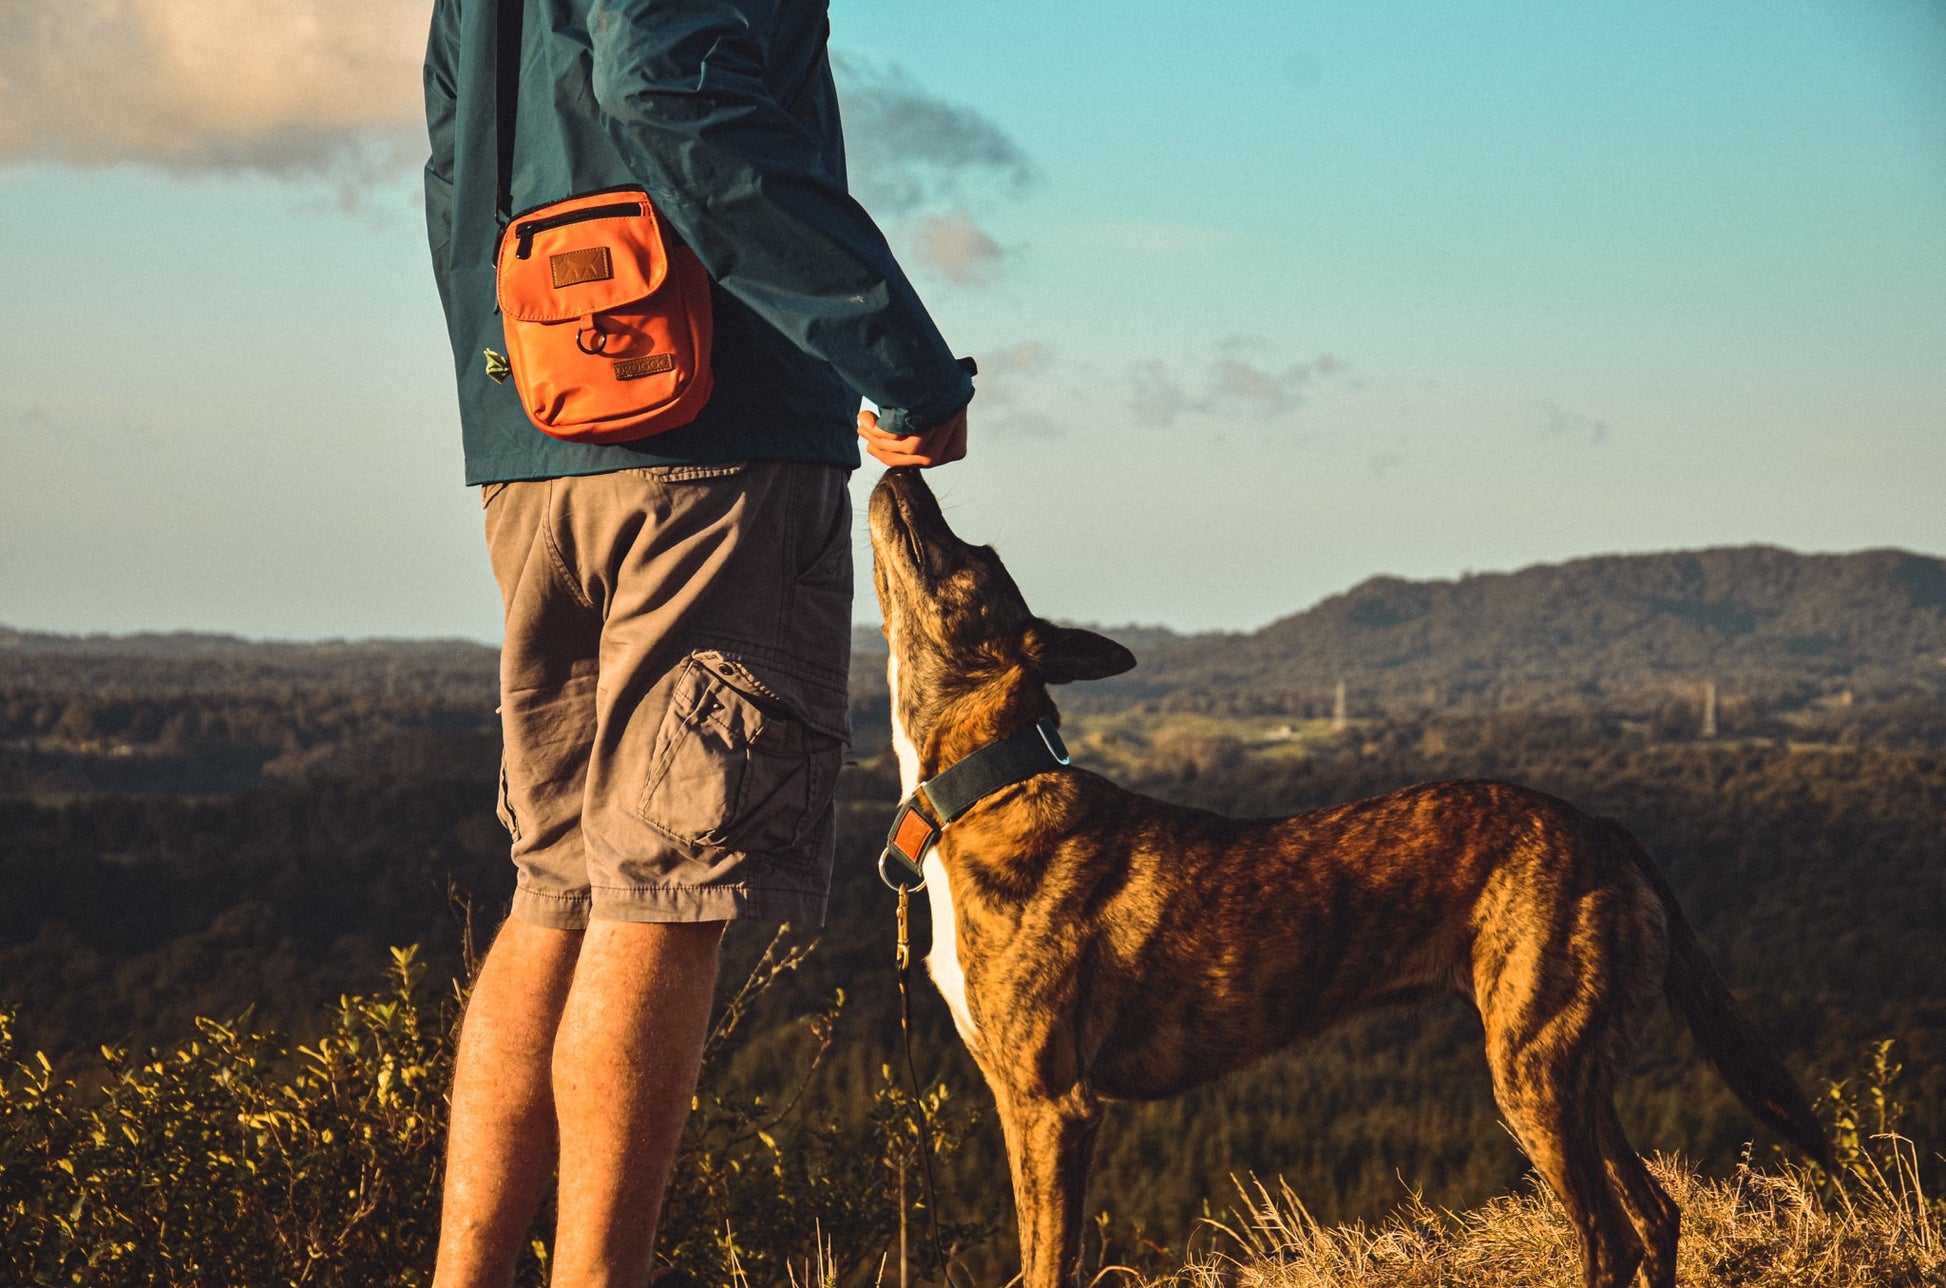 Person wearing a blue rain jacket, dark grey shorts and the walking bag in rust colour holding treats while brindle dog is sniffing his hands. Pine forest background from a summit view and blue sky with some small clouds.